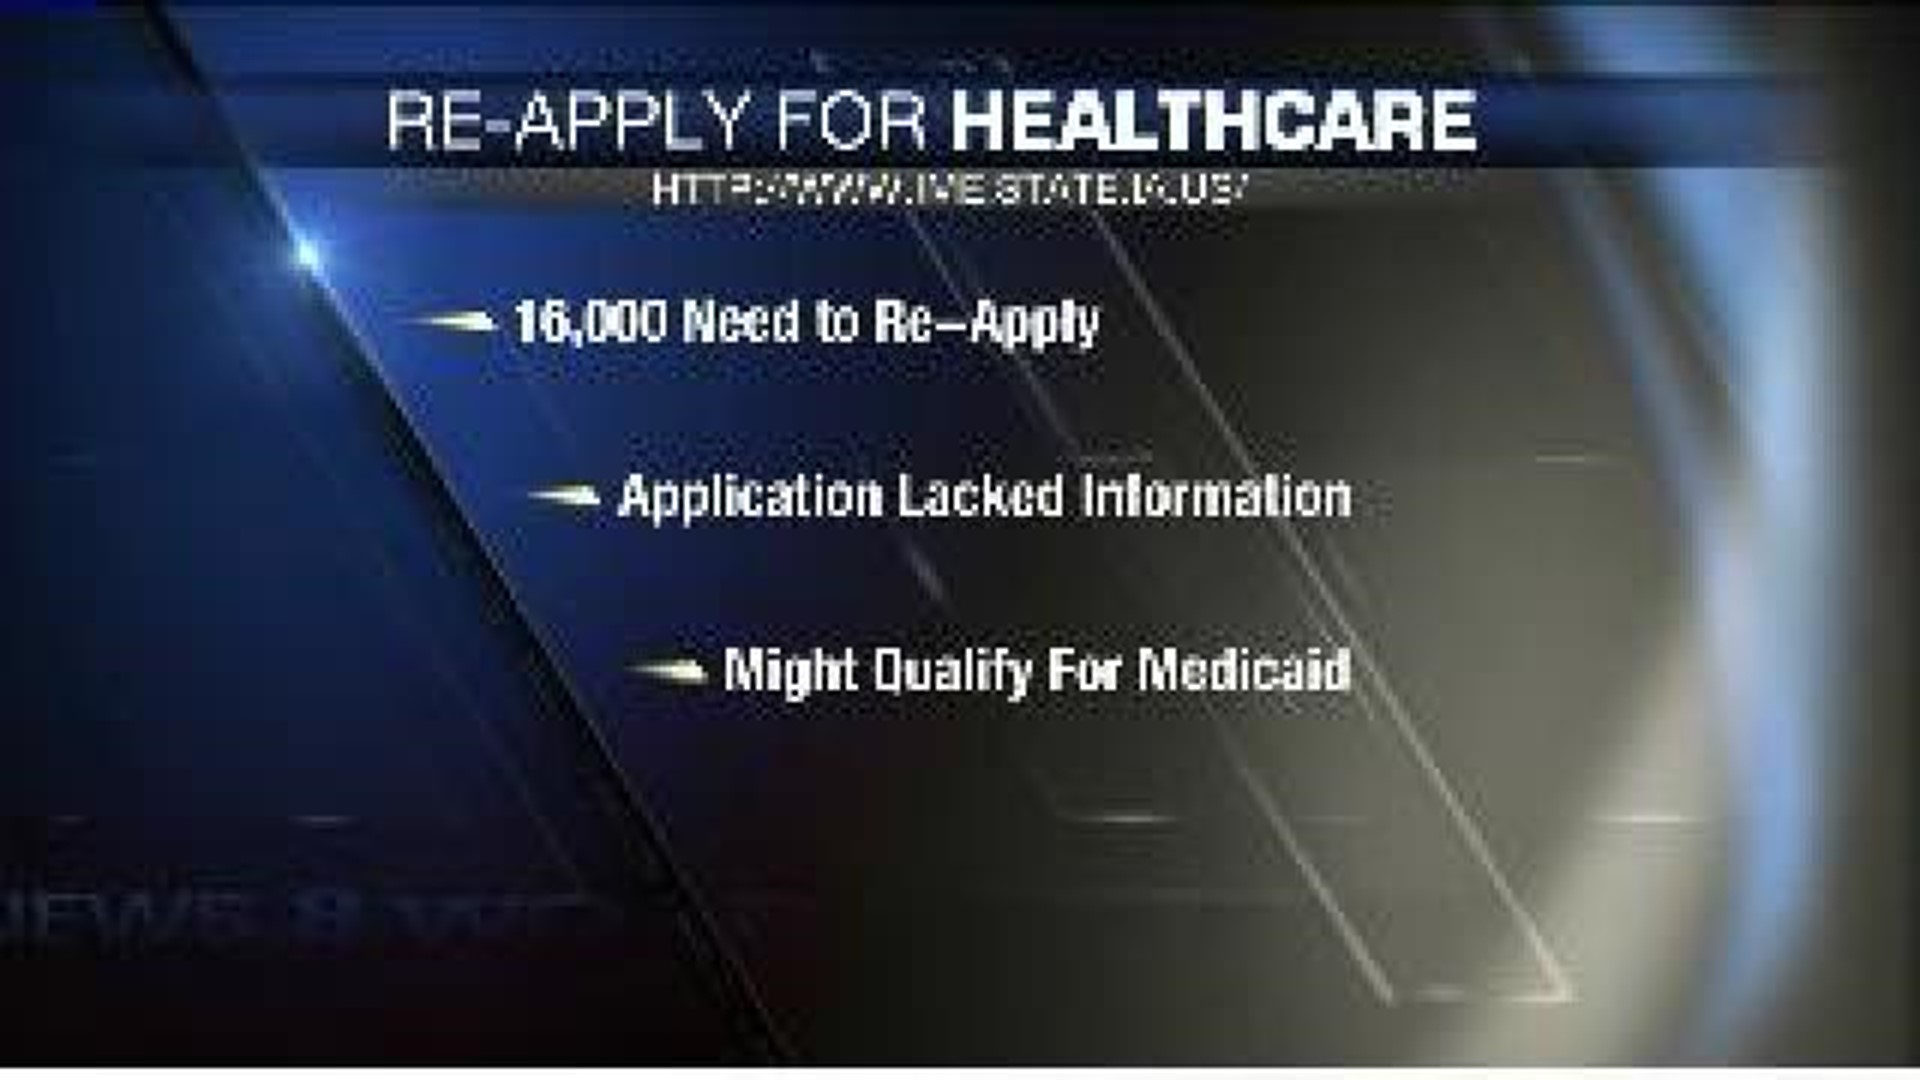 Thousands of Iowans told to reapply for healthcare